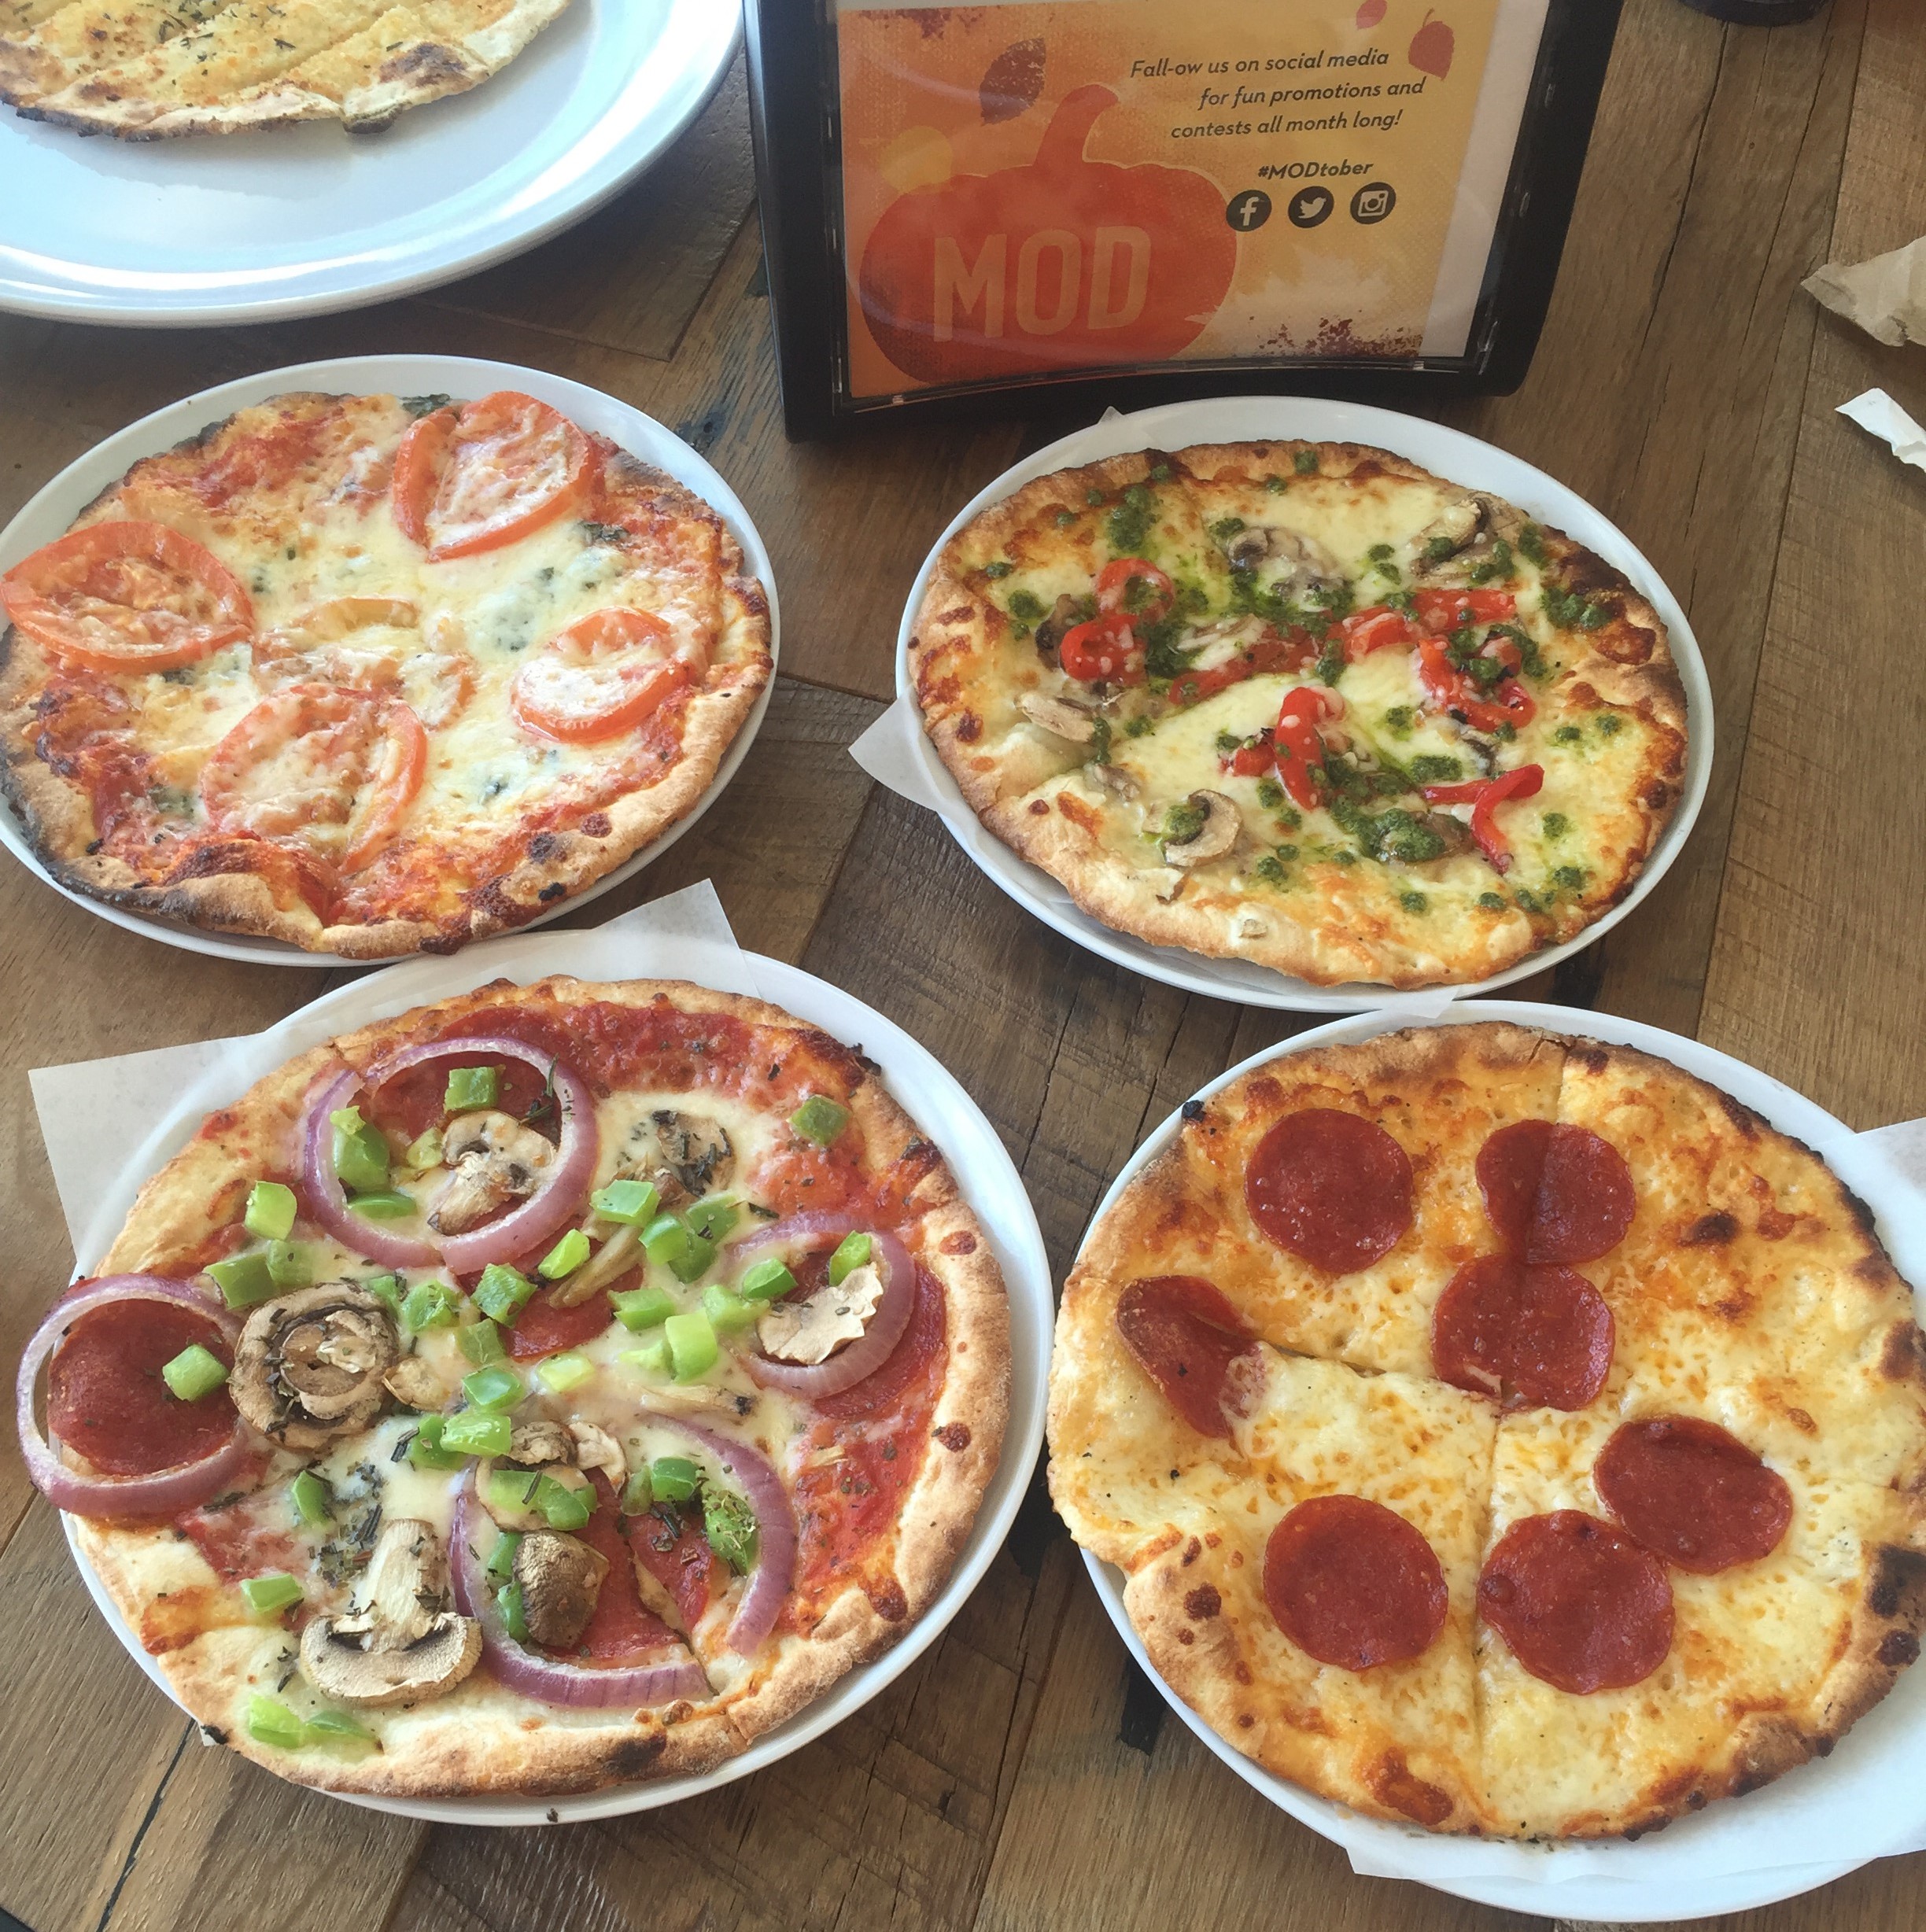 Here are the 4 pizzas all together.